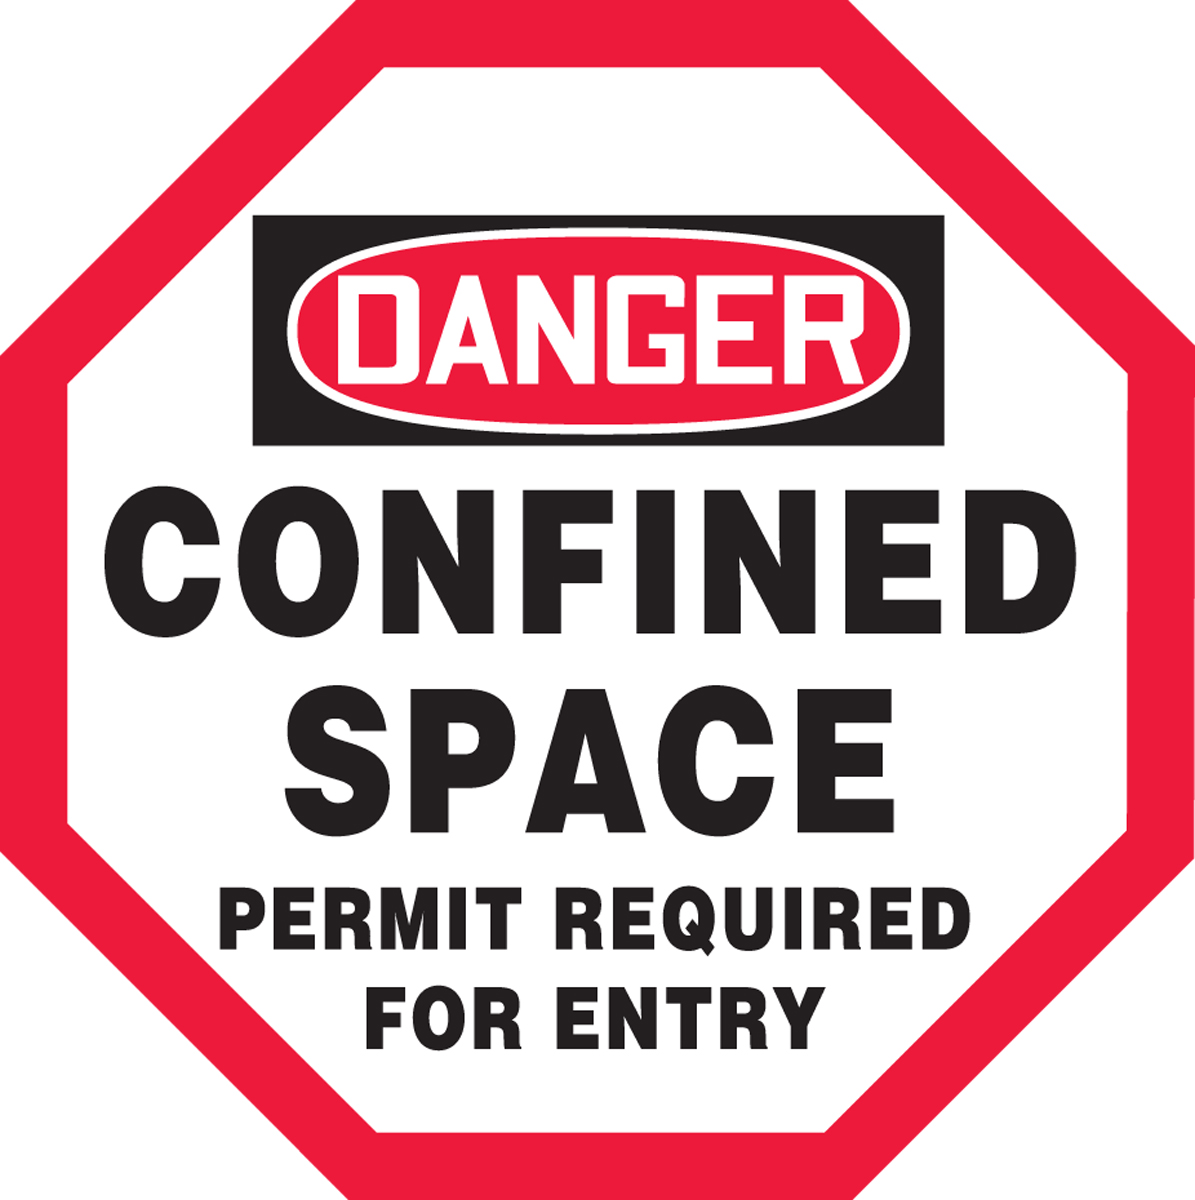 DANGER CONFINED SPACE PREMIT REQUIRED FOR ENTRY